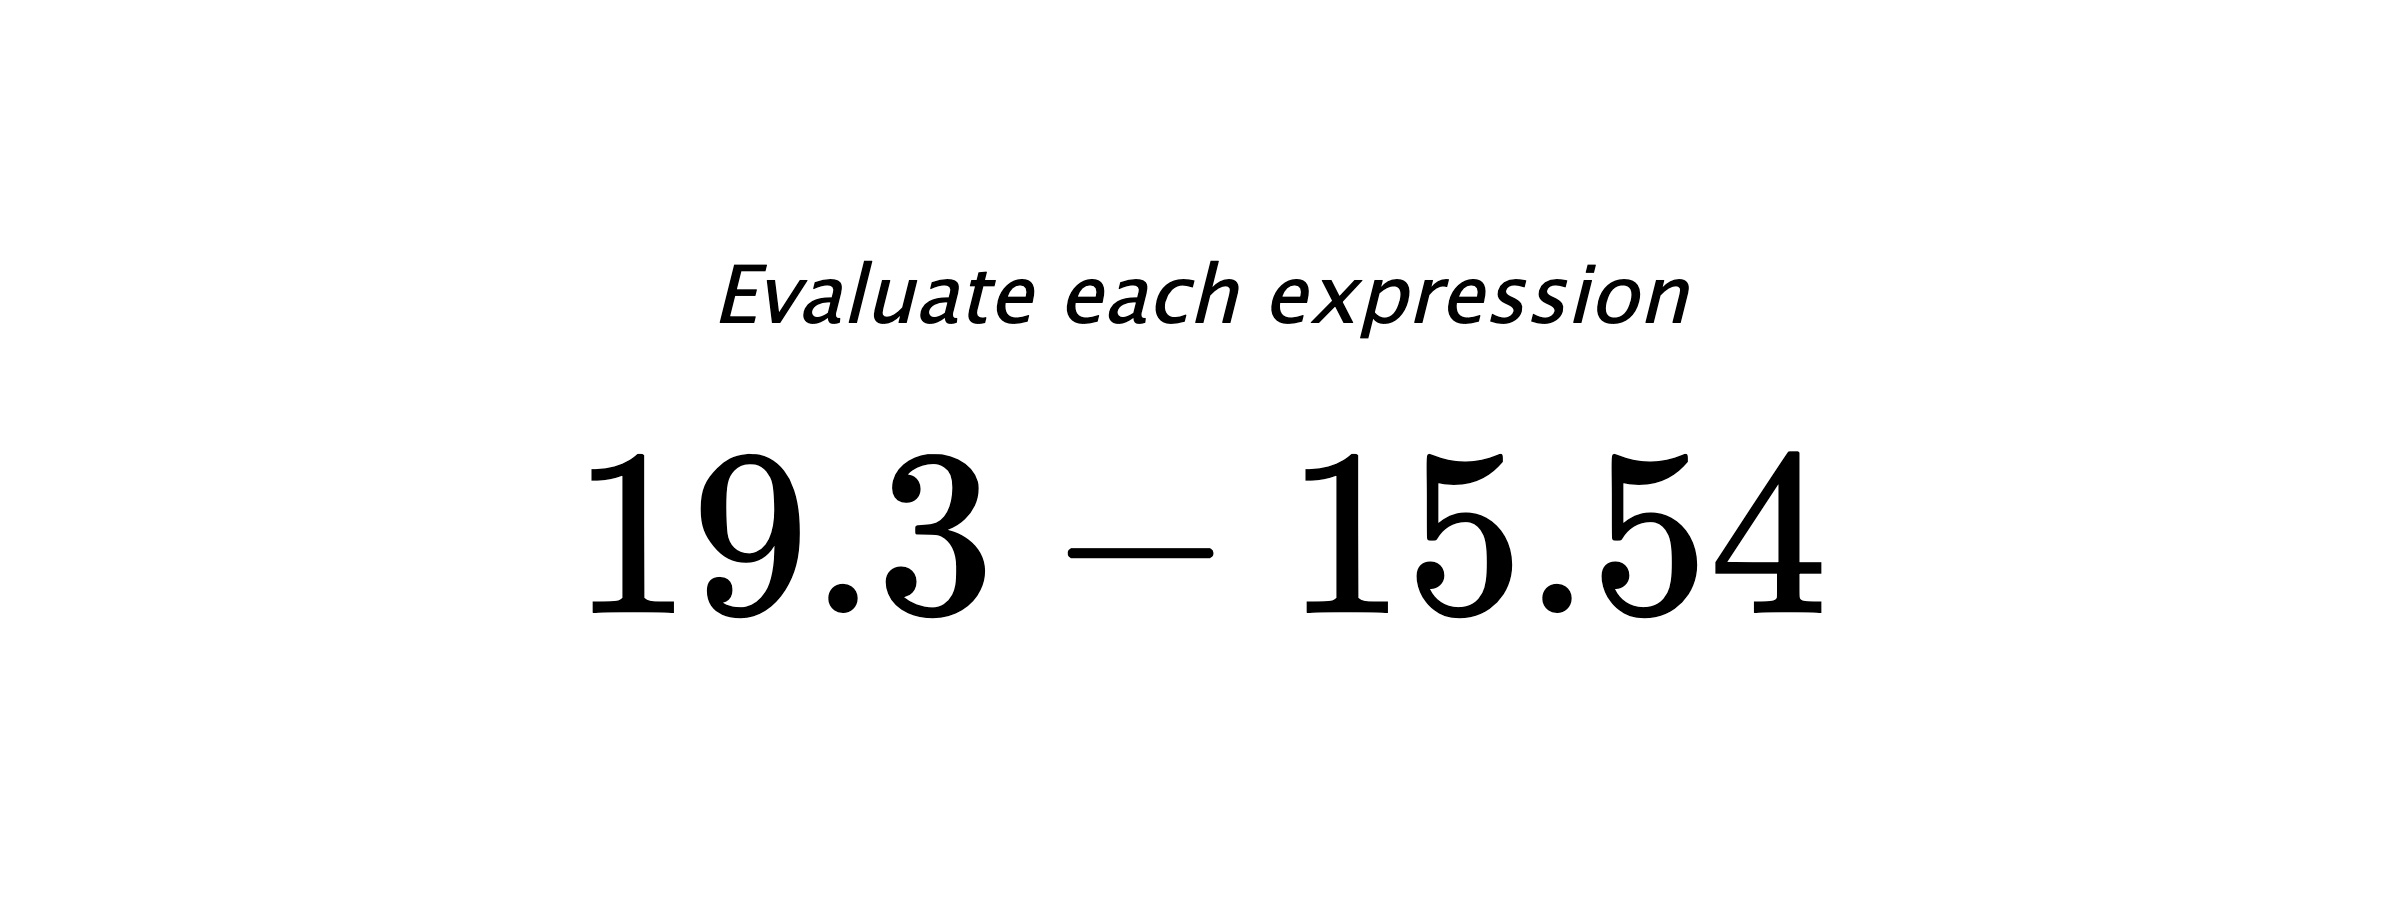 Evaluate each expression $ 19.3-15.54 $